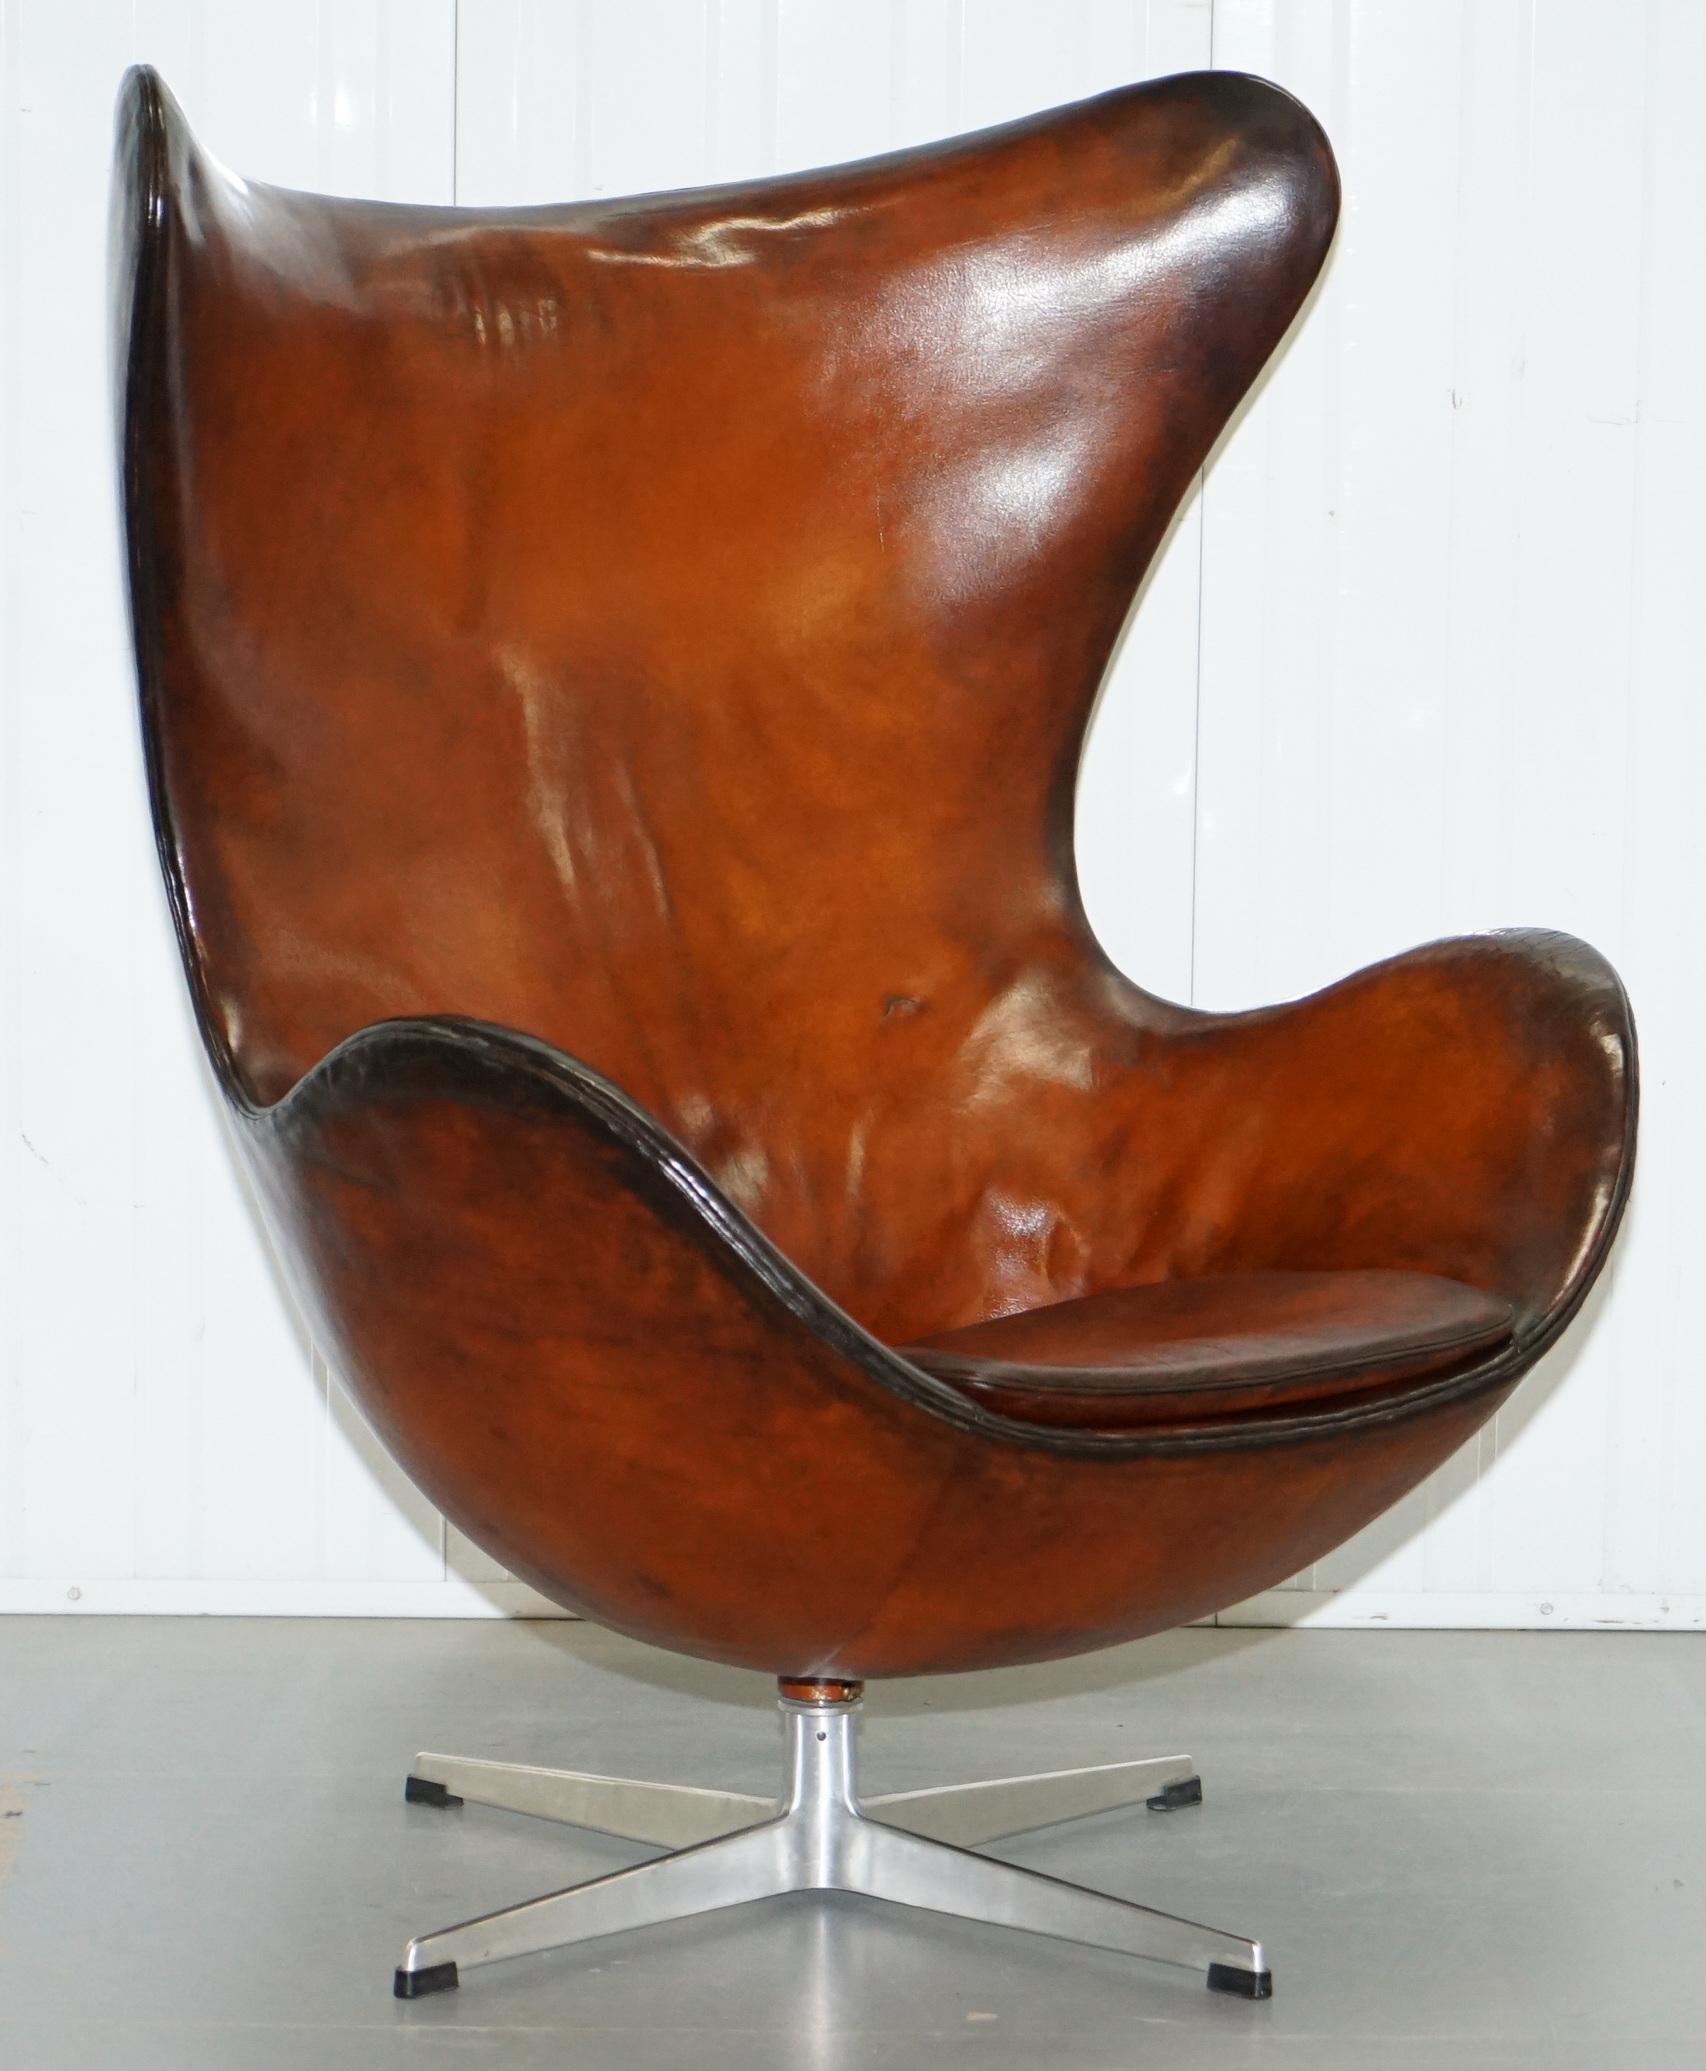 We are delighted to offer for sale this original, 1963 Firtz Hansen Arne Jacobson hand dyed whisky brown leather egg chair model number 3316

A rare find in restored condition, this piece is today considered art, it’s so sculptural and artistic,